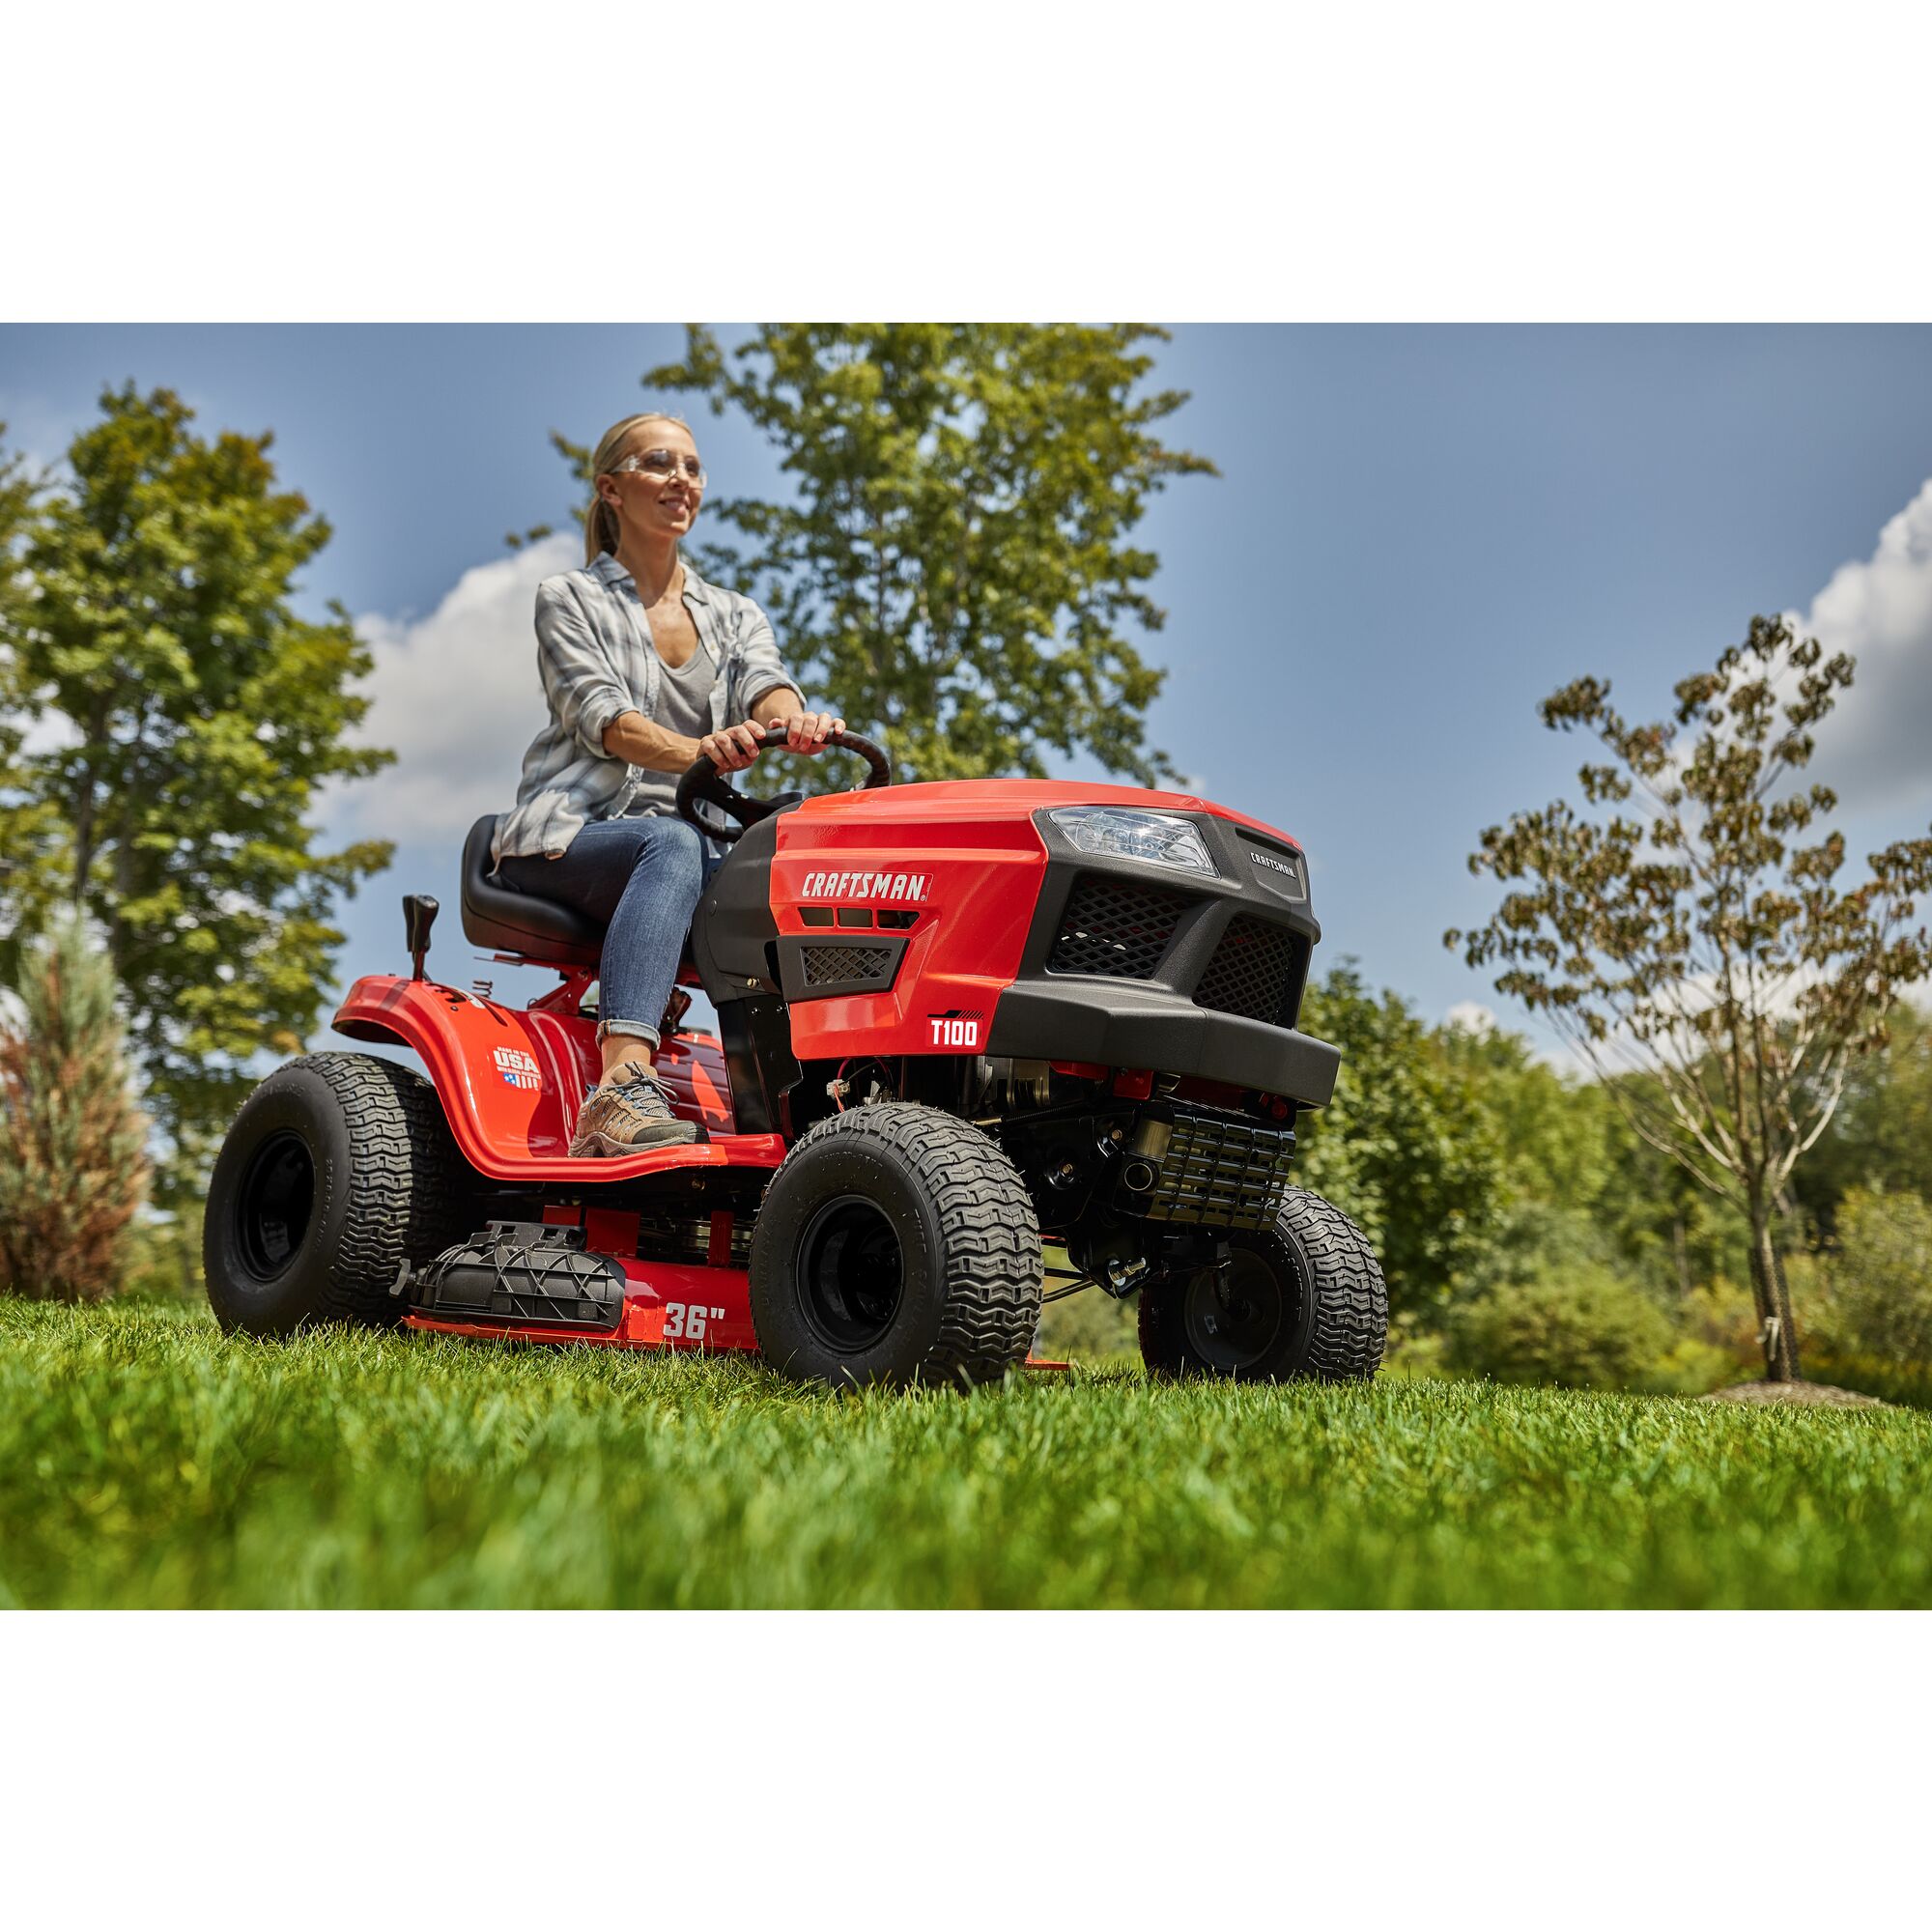 View of CRAFTSMAN Riding Mowers  being used by consumer